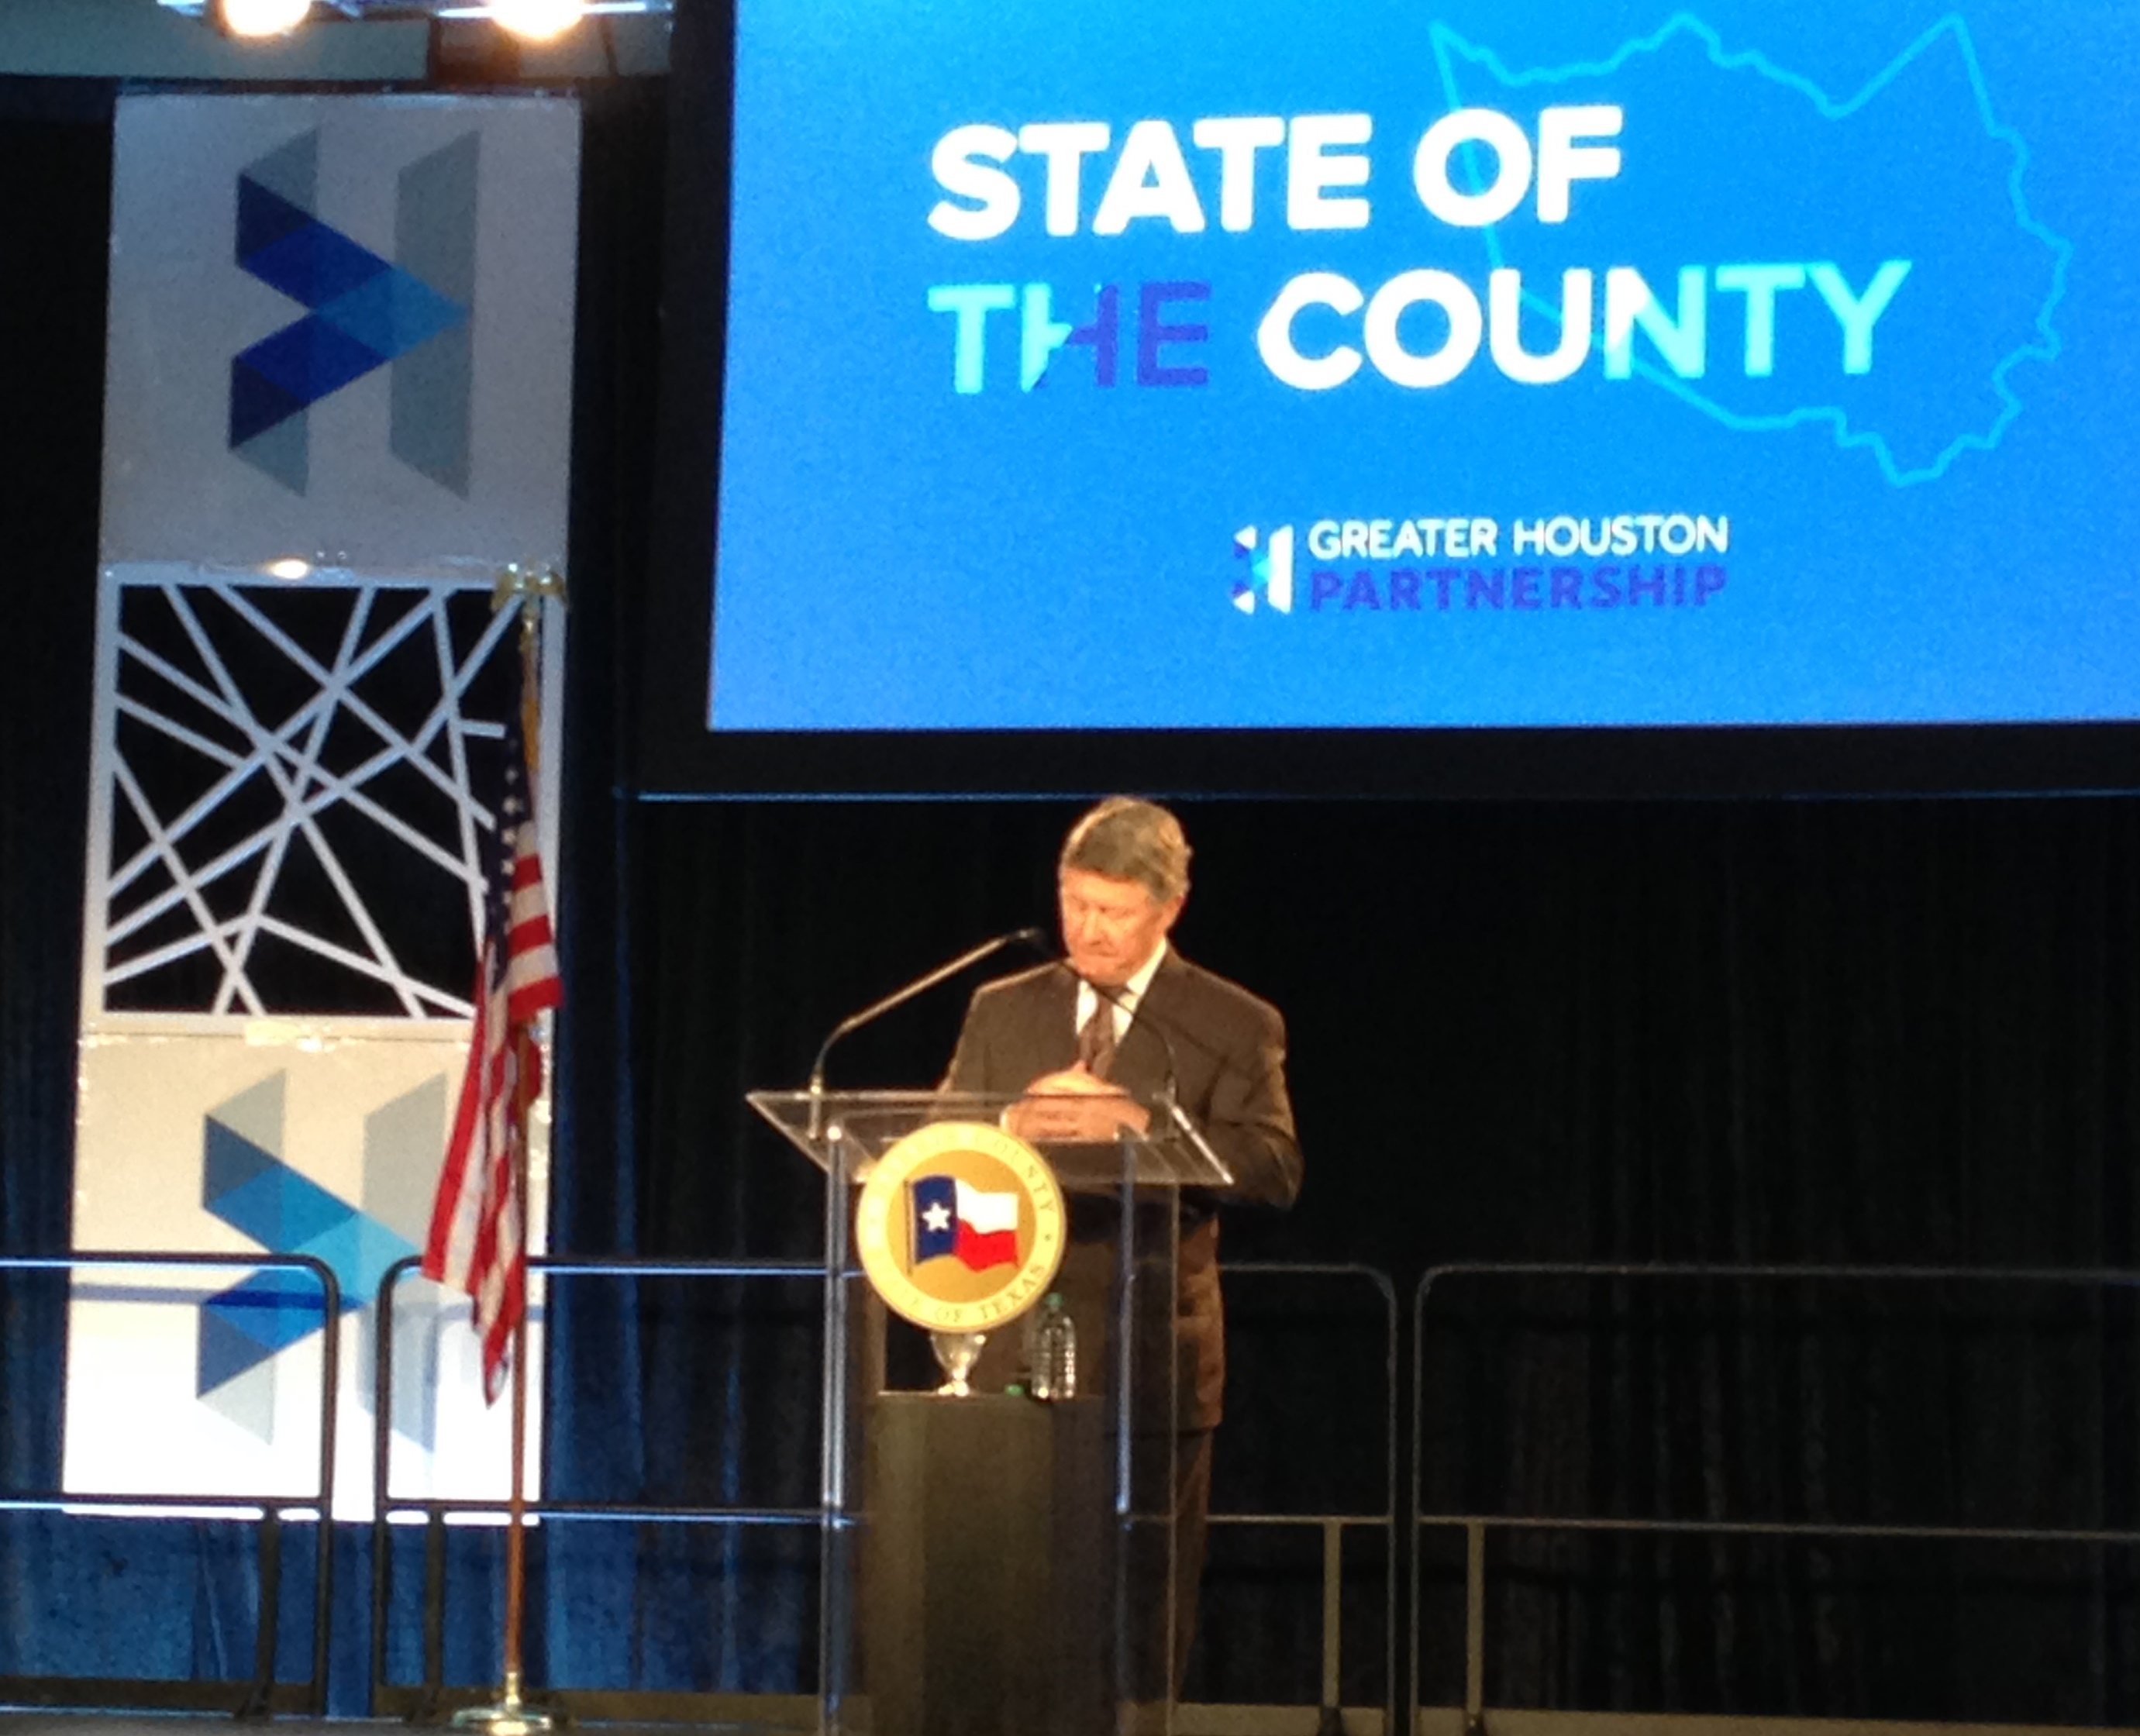 Harris County Judge Ed Emmett delivered his ninth State of the County Address at Houston's NRG Center and underlined that improving the county's transportation is one of its main challenges.